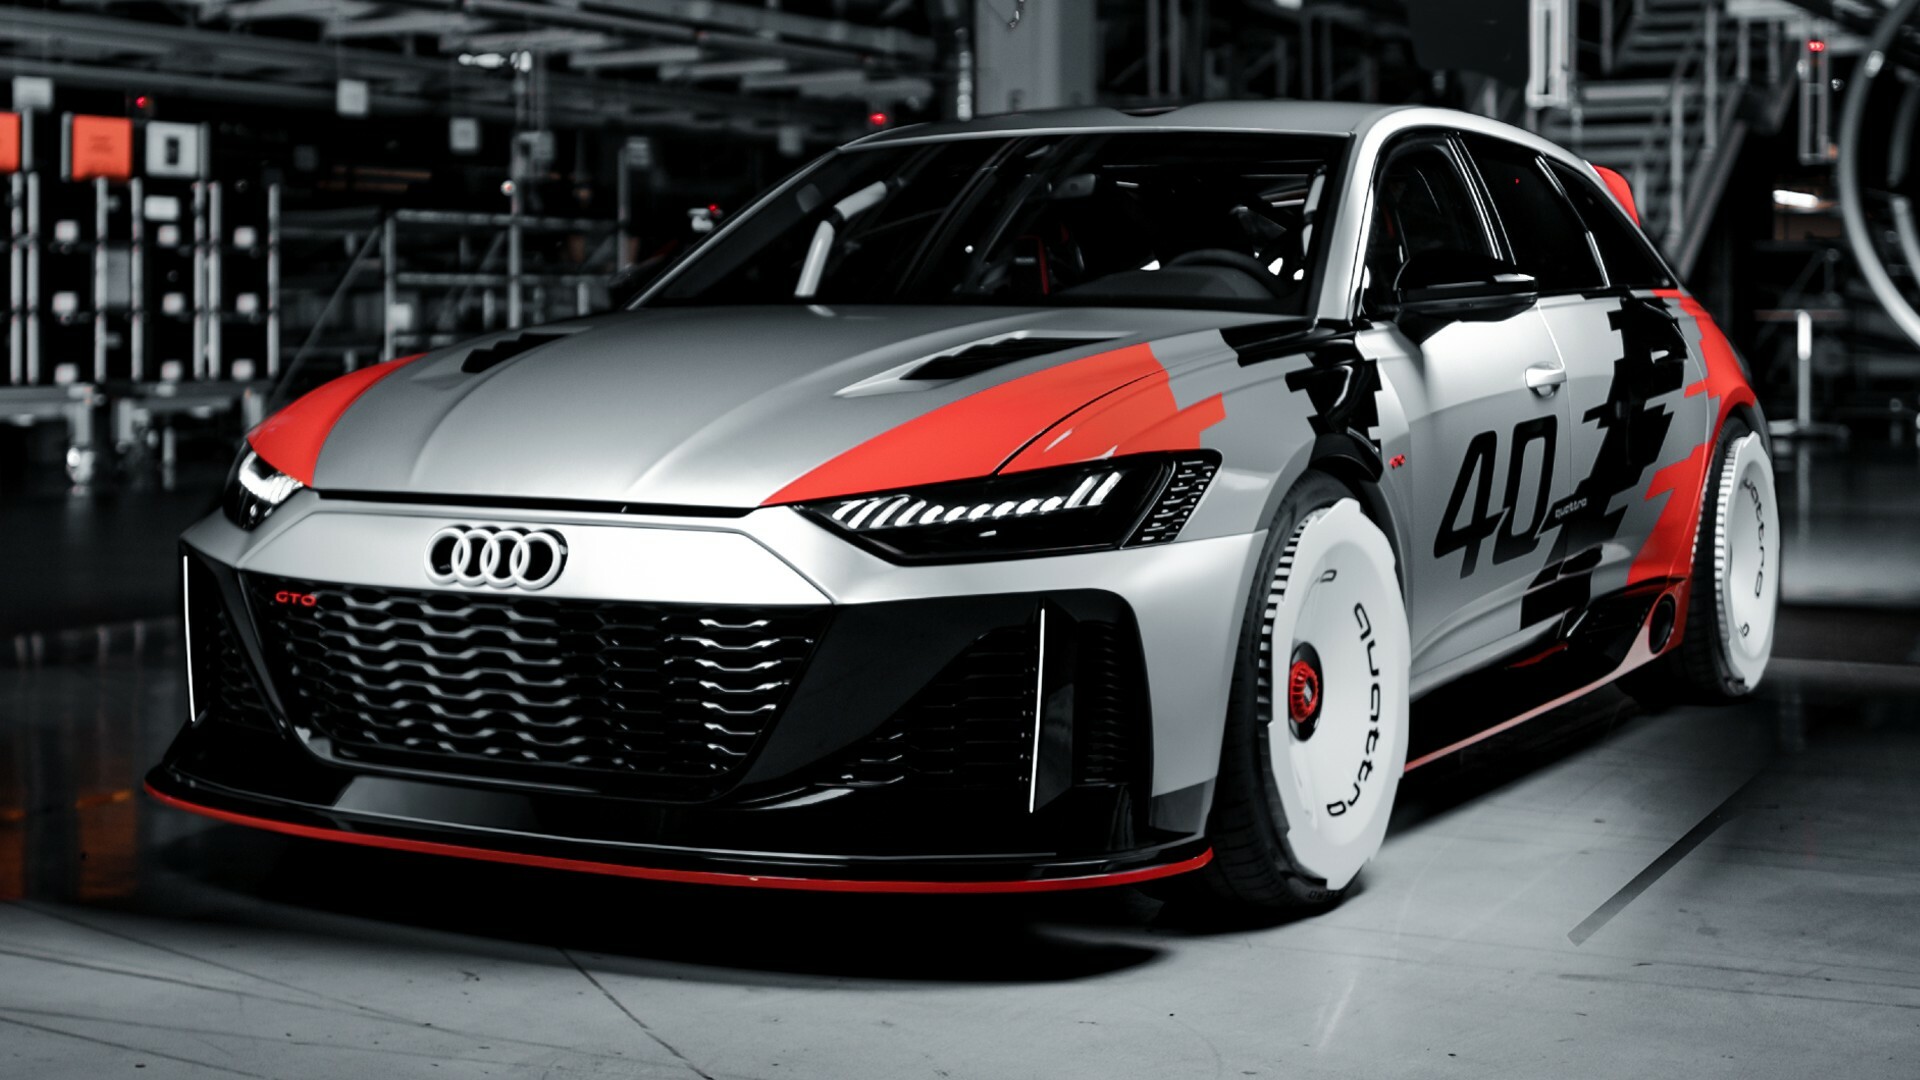 Audi Readying More Extreme Variant above RS 6 performance, Likely RS 7 GTO  - Audi Club North America